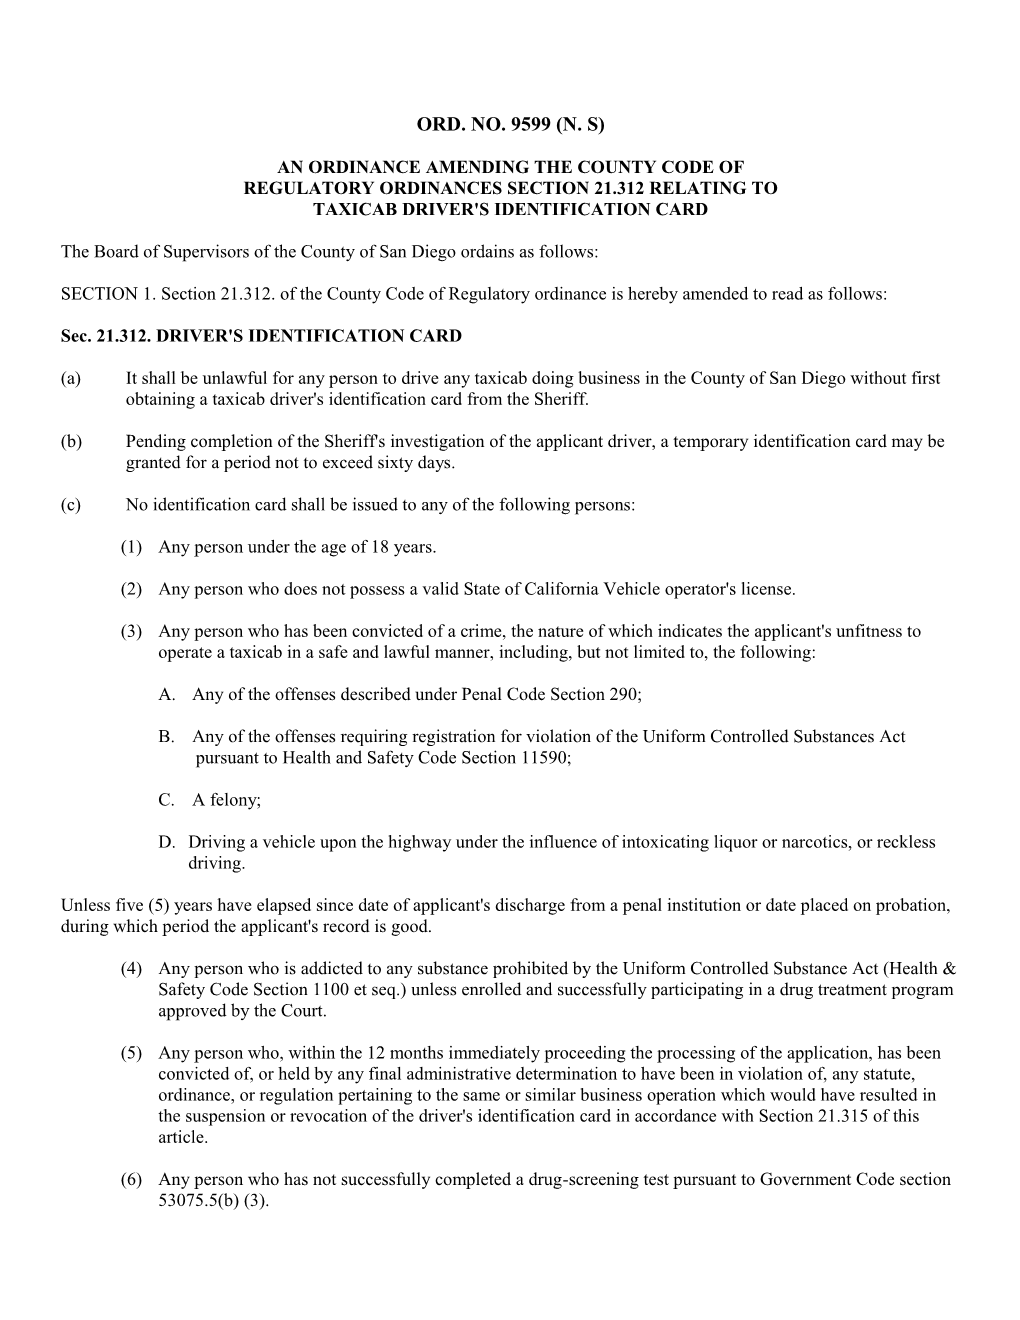 An Ordinance Amending the County Code Of